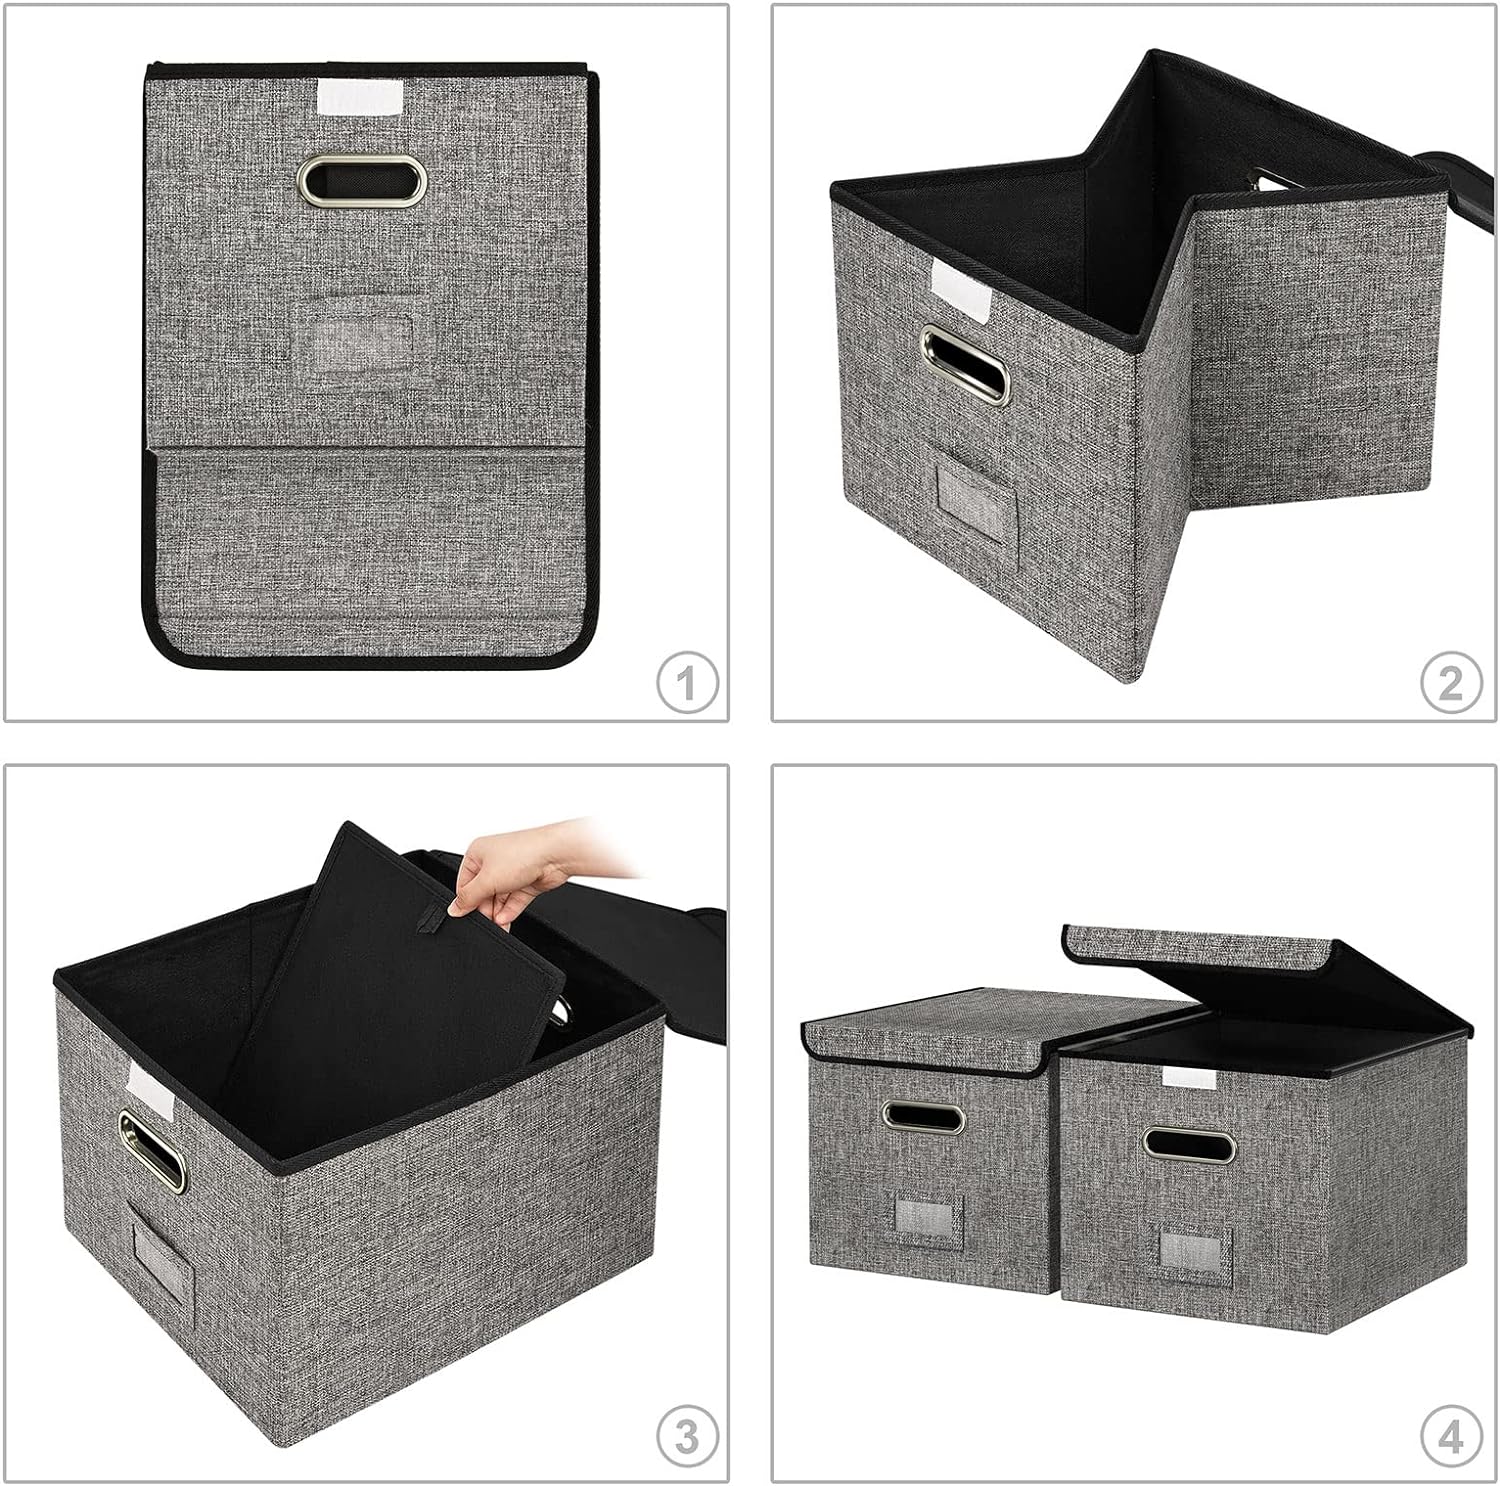 2 Packs File Organizer Box with lid with 5 file folders